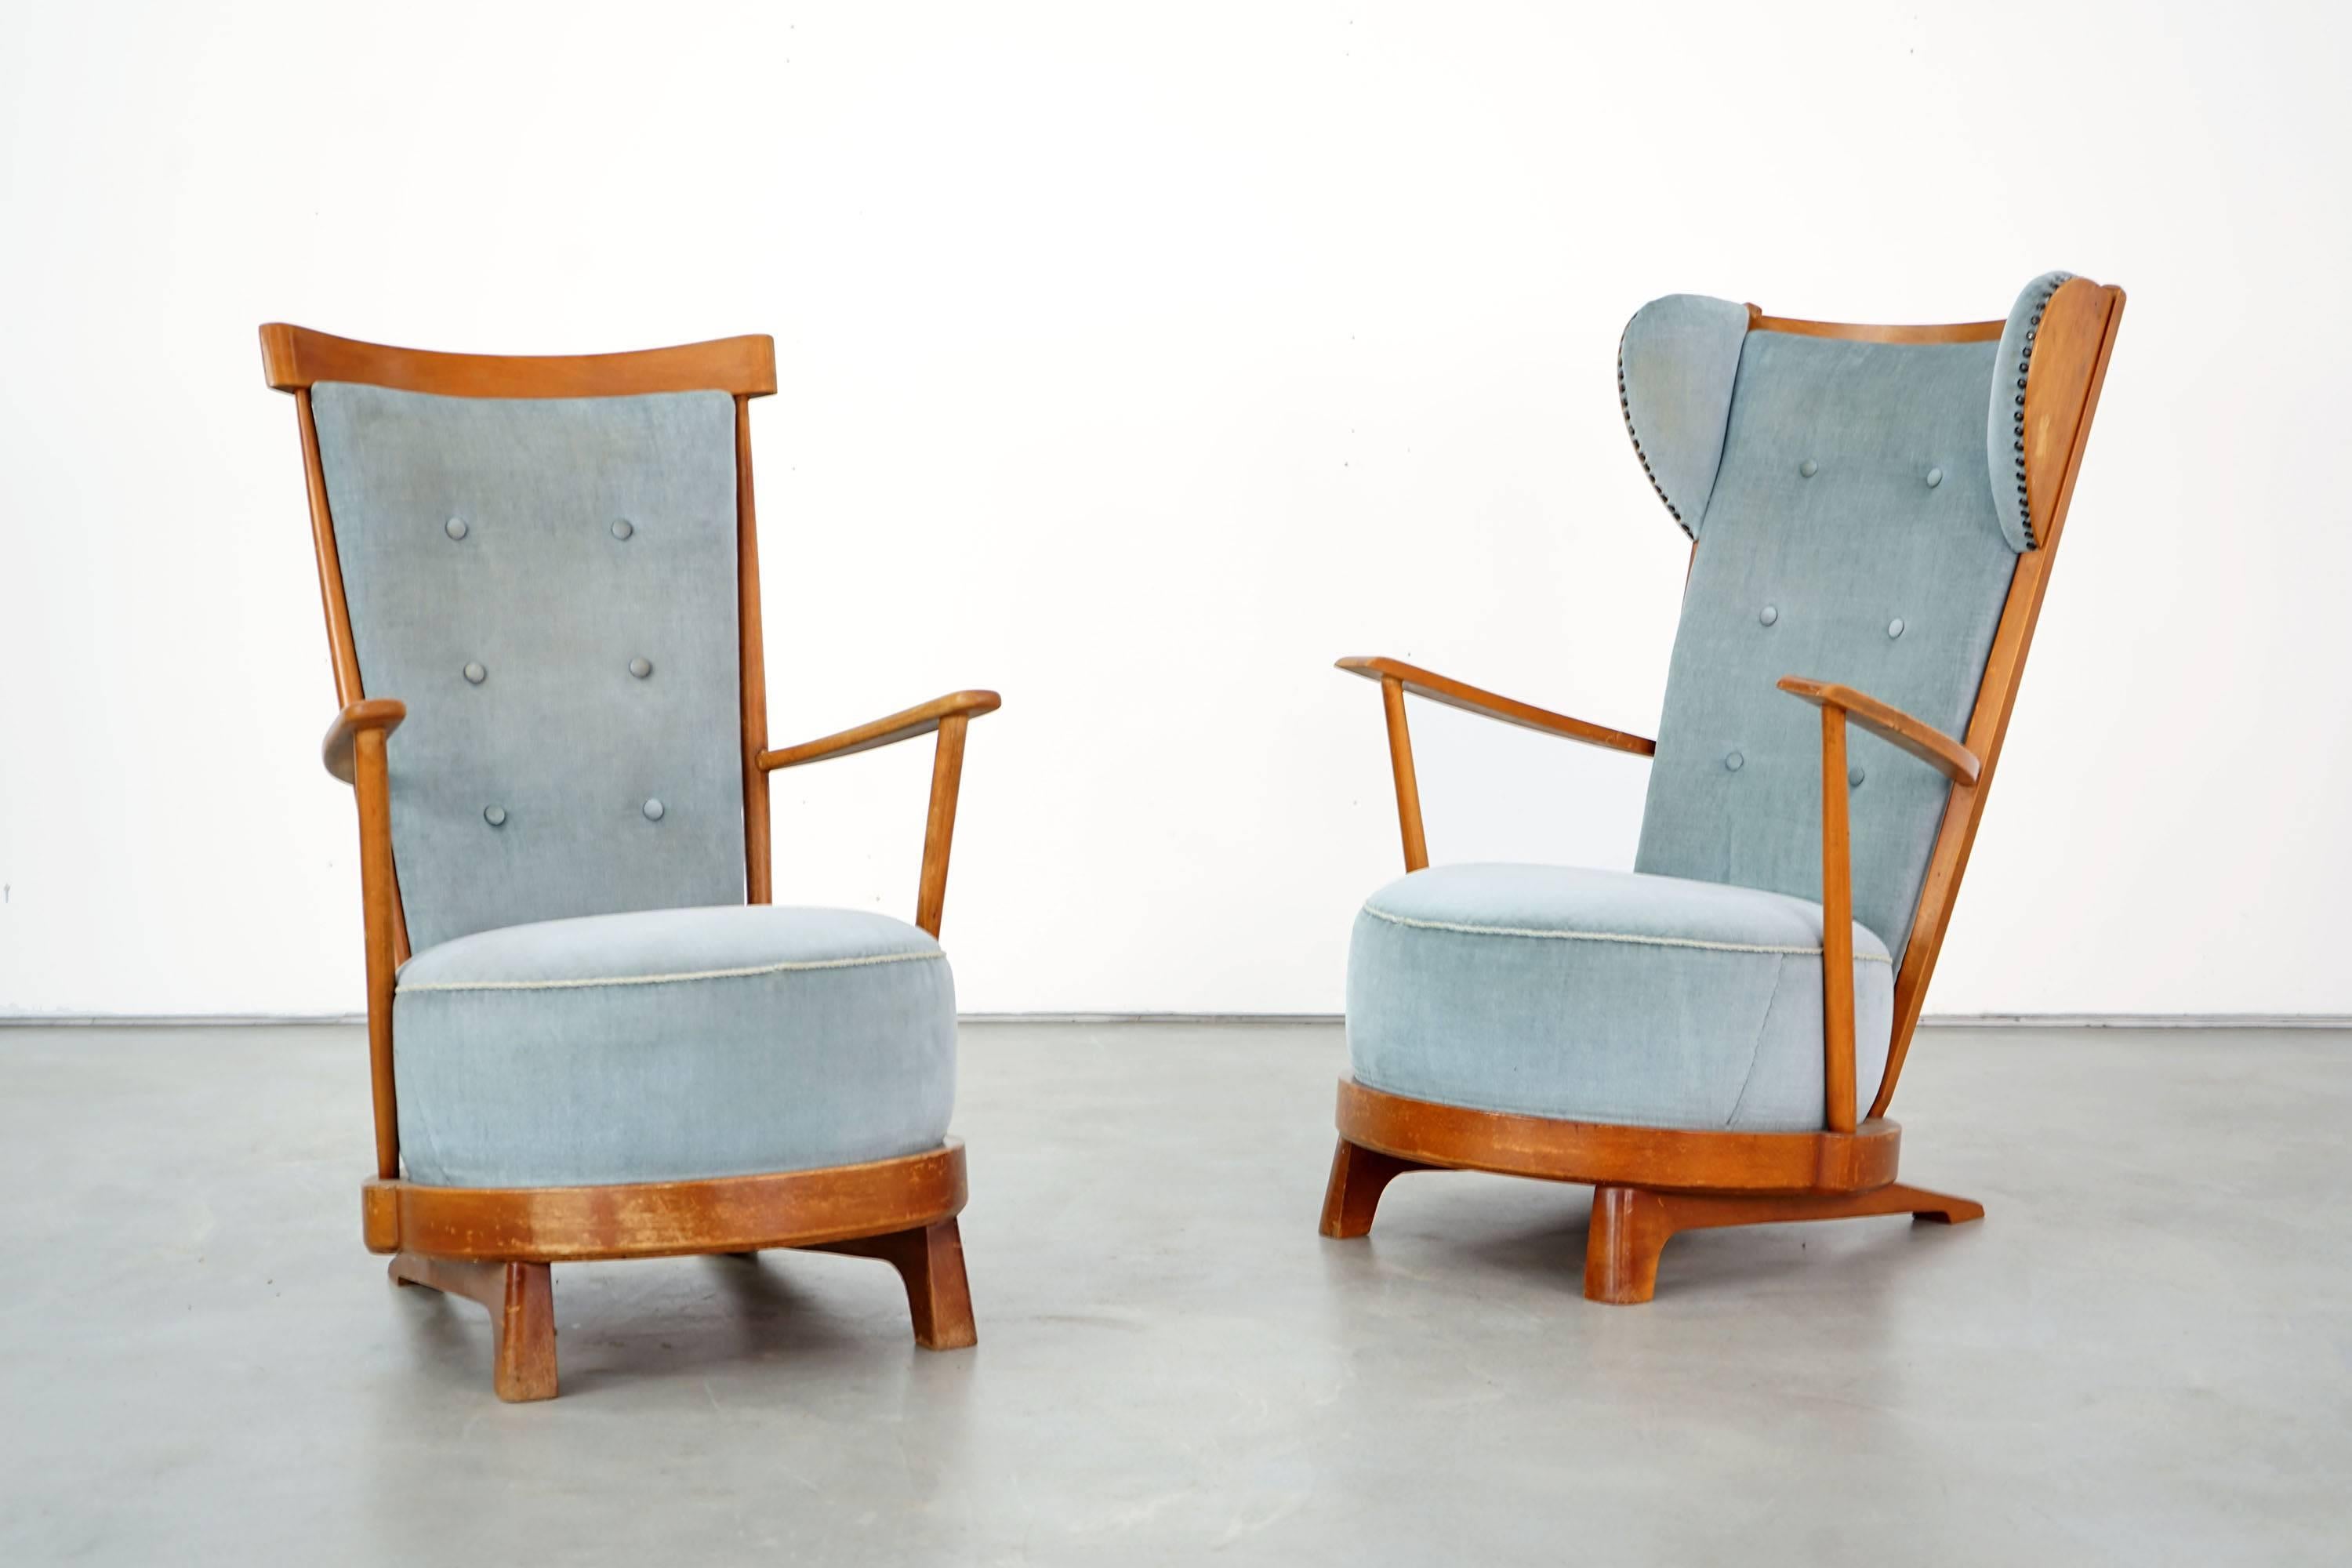 Two sculptural slipper chairs from the 1940s, midcentury design. Beechwood covered with velor.
The offer refers to both slipper chairs shown. Attention: The two chairs differ from each other and therefore have different